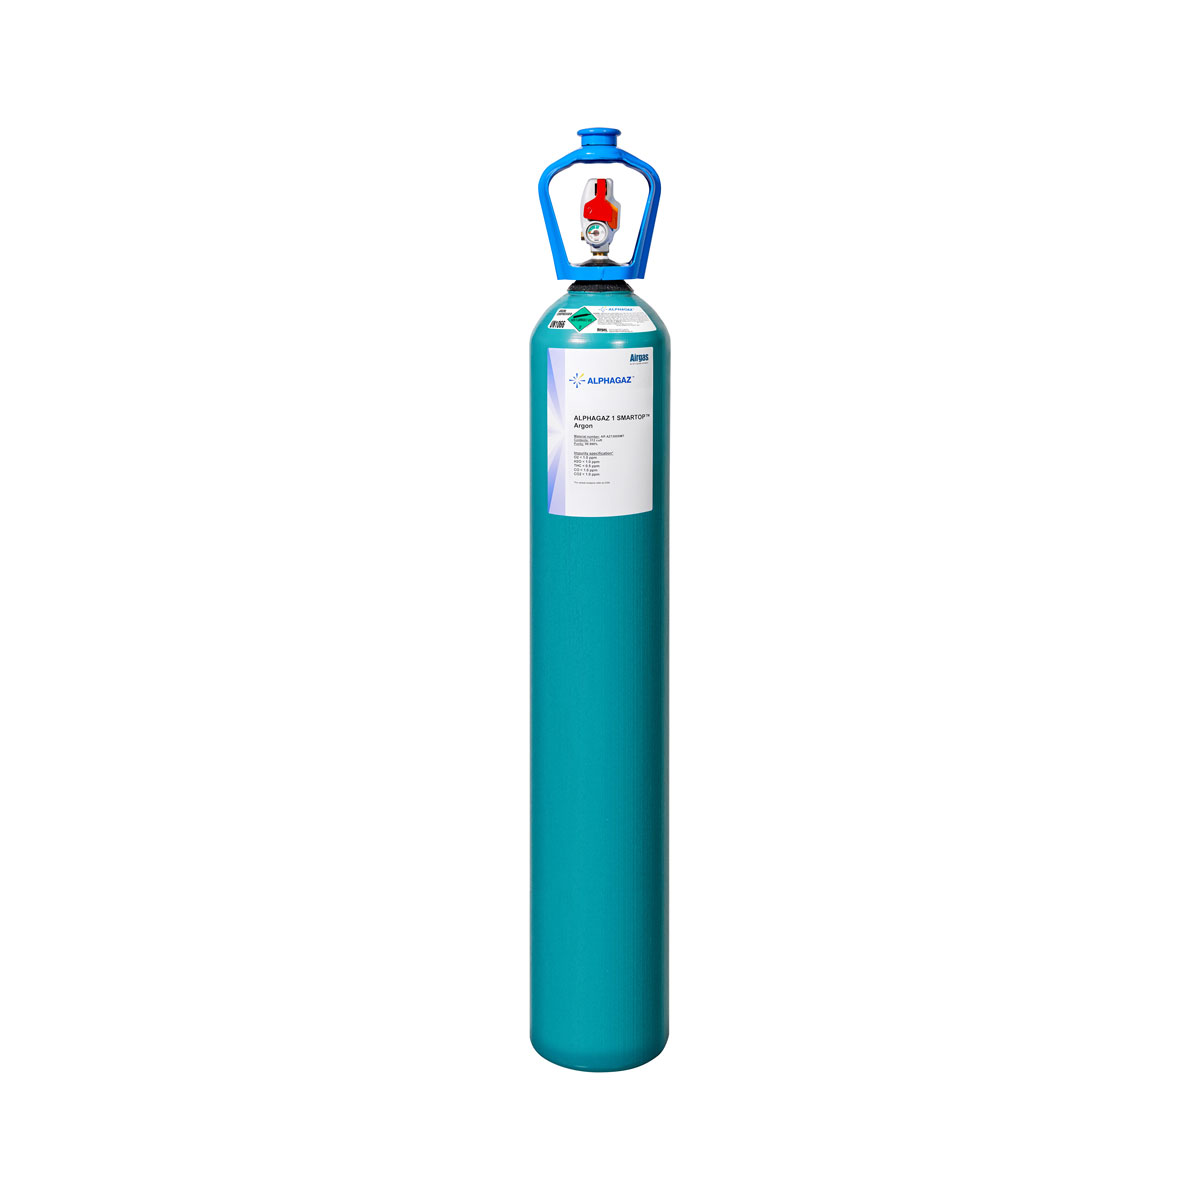 Aluminum Gas Cylinder filled with UHP Argon 99.99%. FREE SHIPPING - Argon  Wine Adapter®